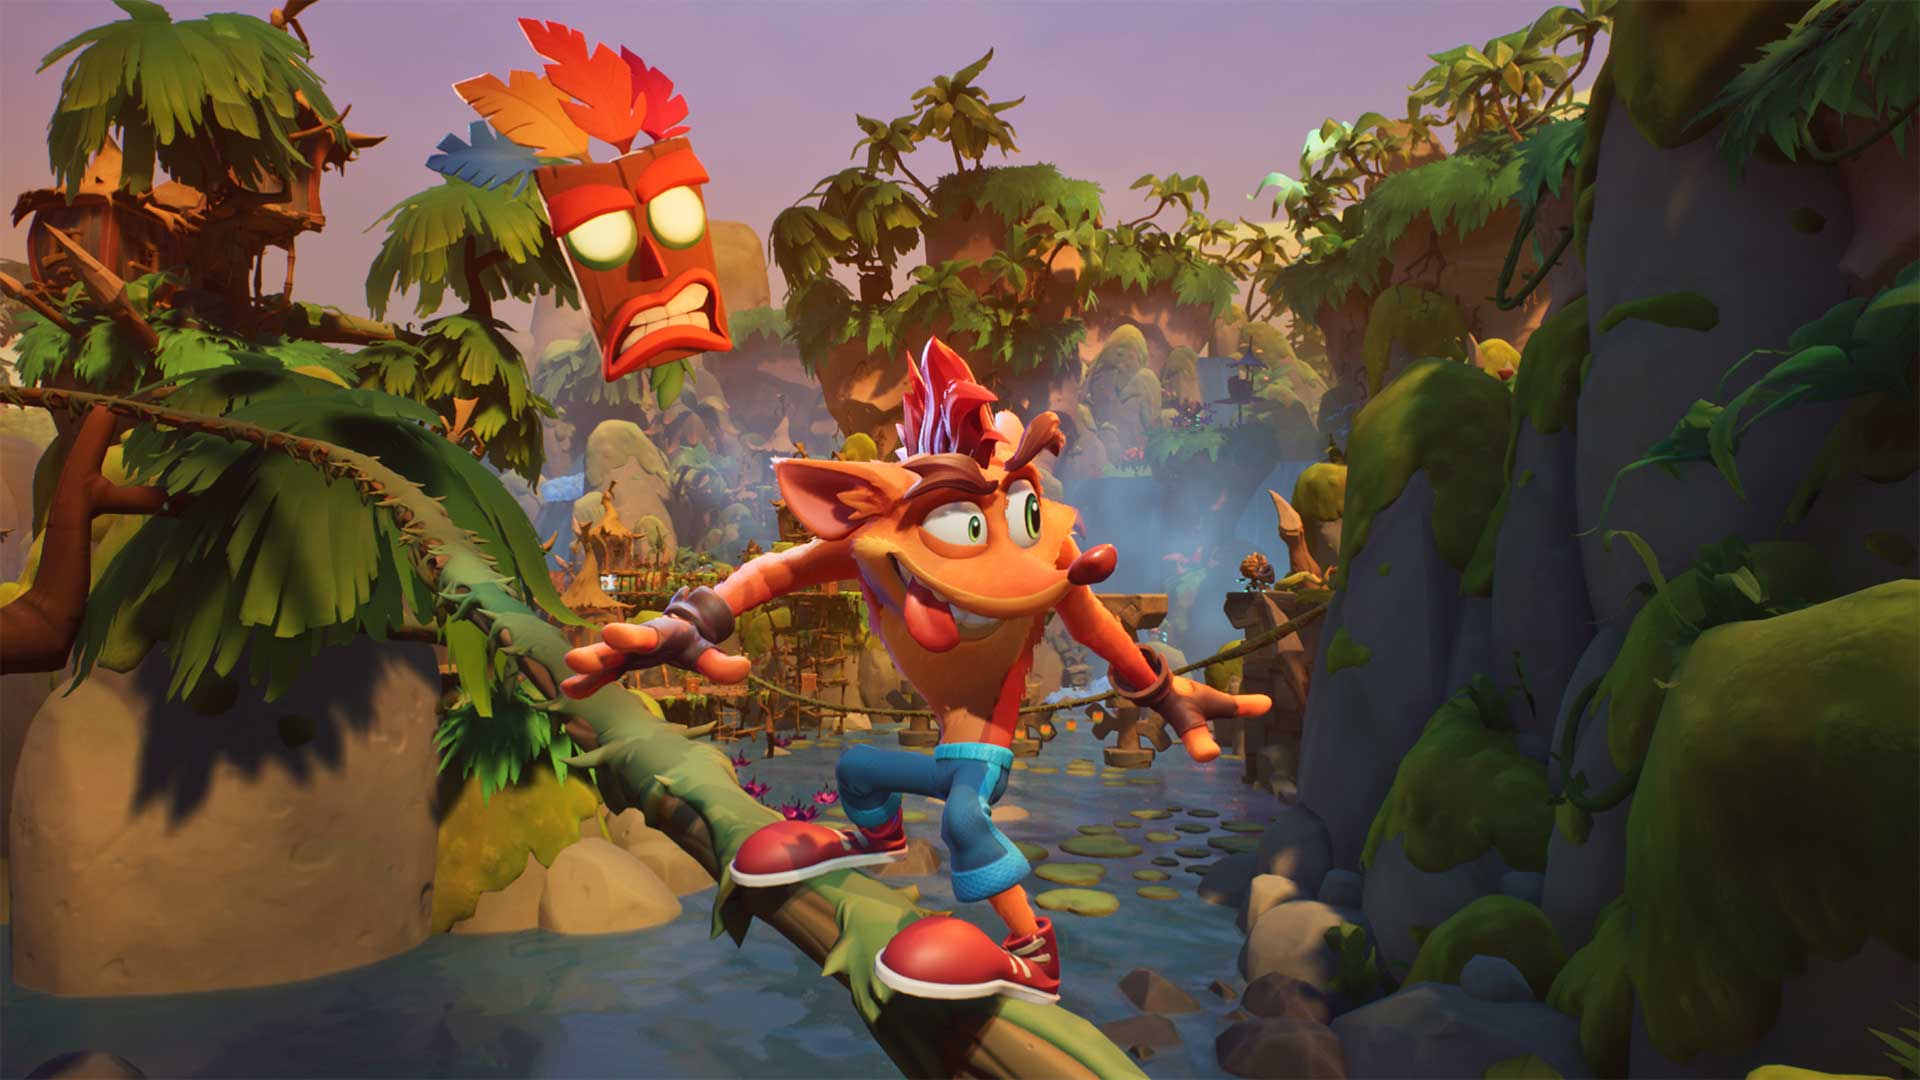 Crash Bandicoot 4: It’s About Time Announced for PS4 and Xbox One